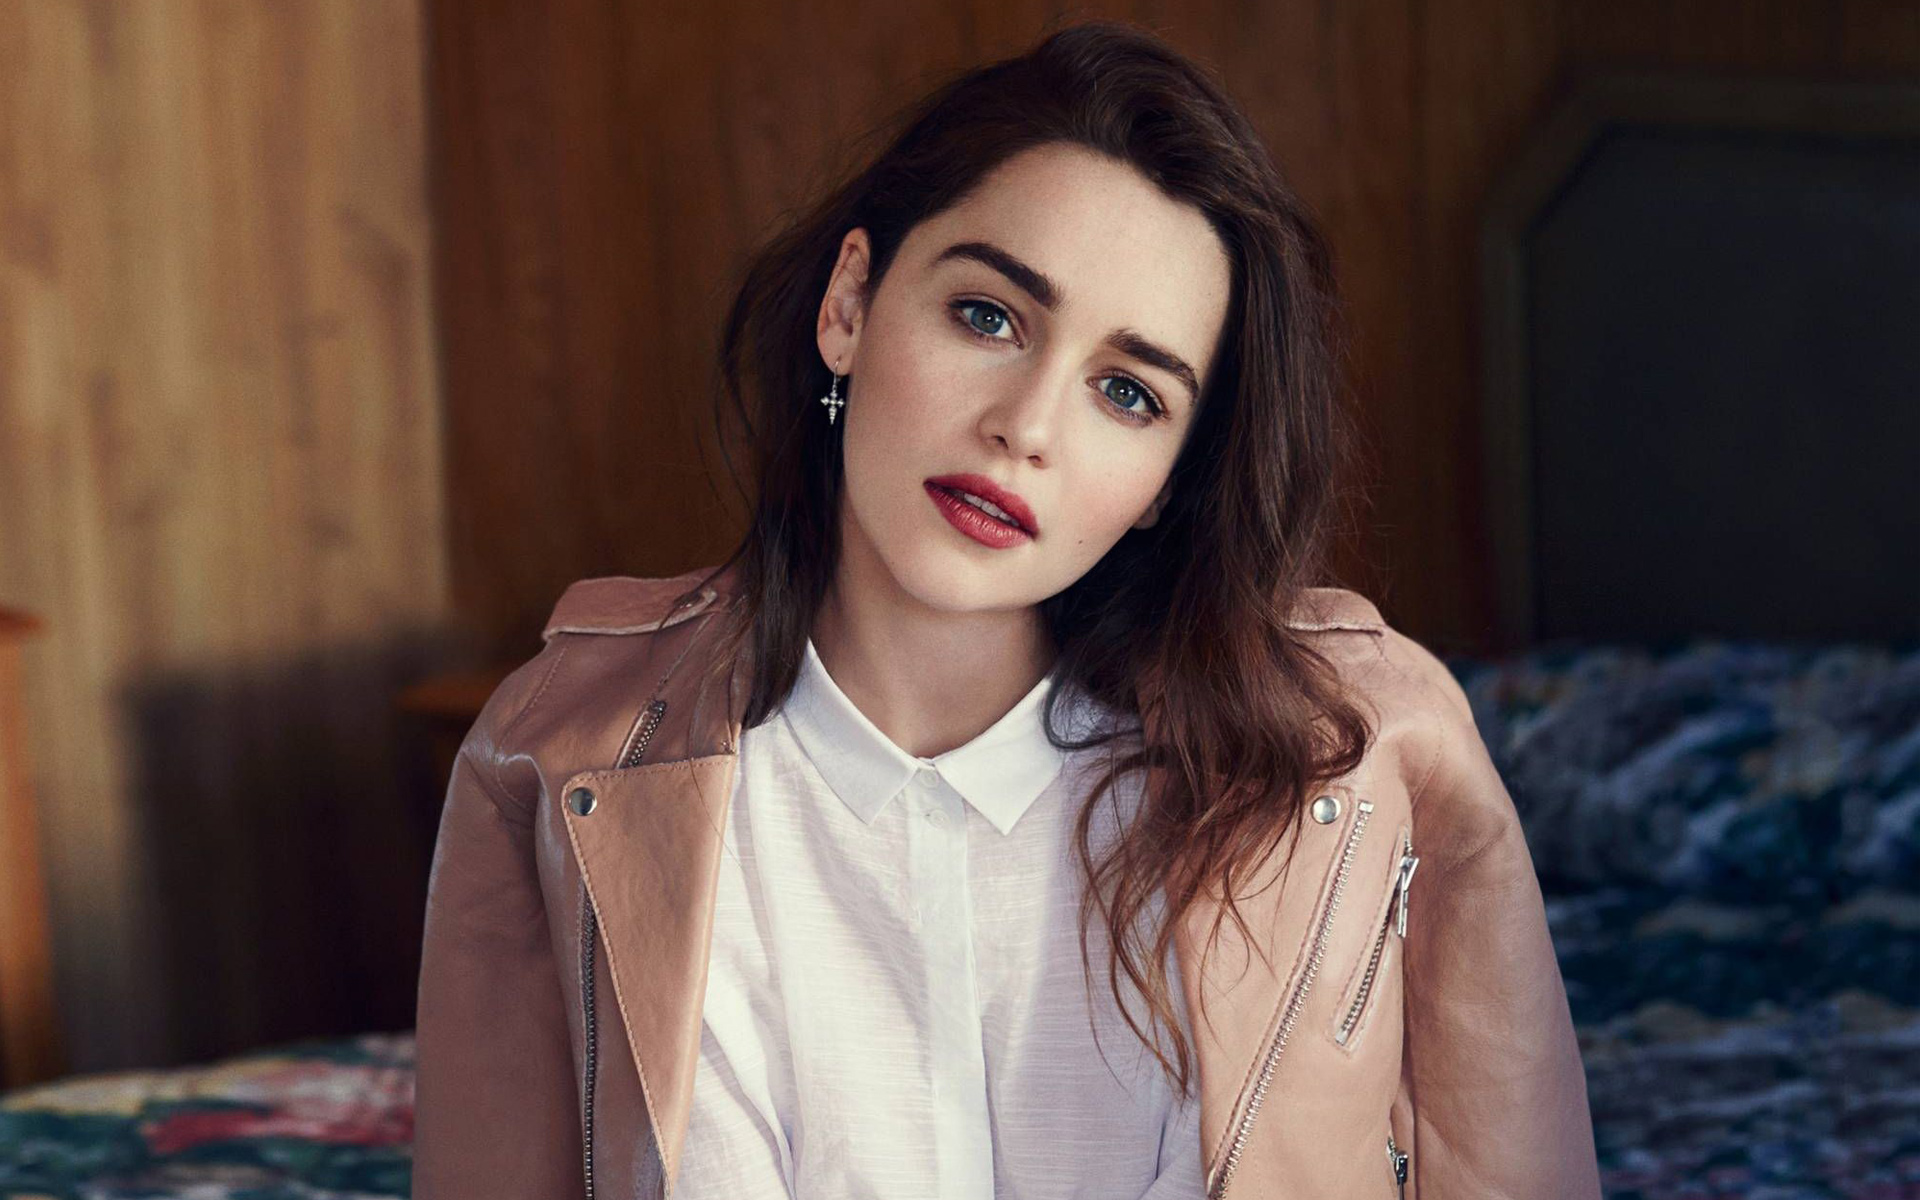 Emilia Clarke is said to attend her "Game of Thrones" audition after a time of starving herself to look as good as possible; the mix of stress and sugar rush from a coke she had made her do a robot/chicken dance which is said to make her highly memorable.